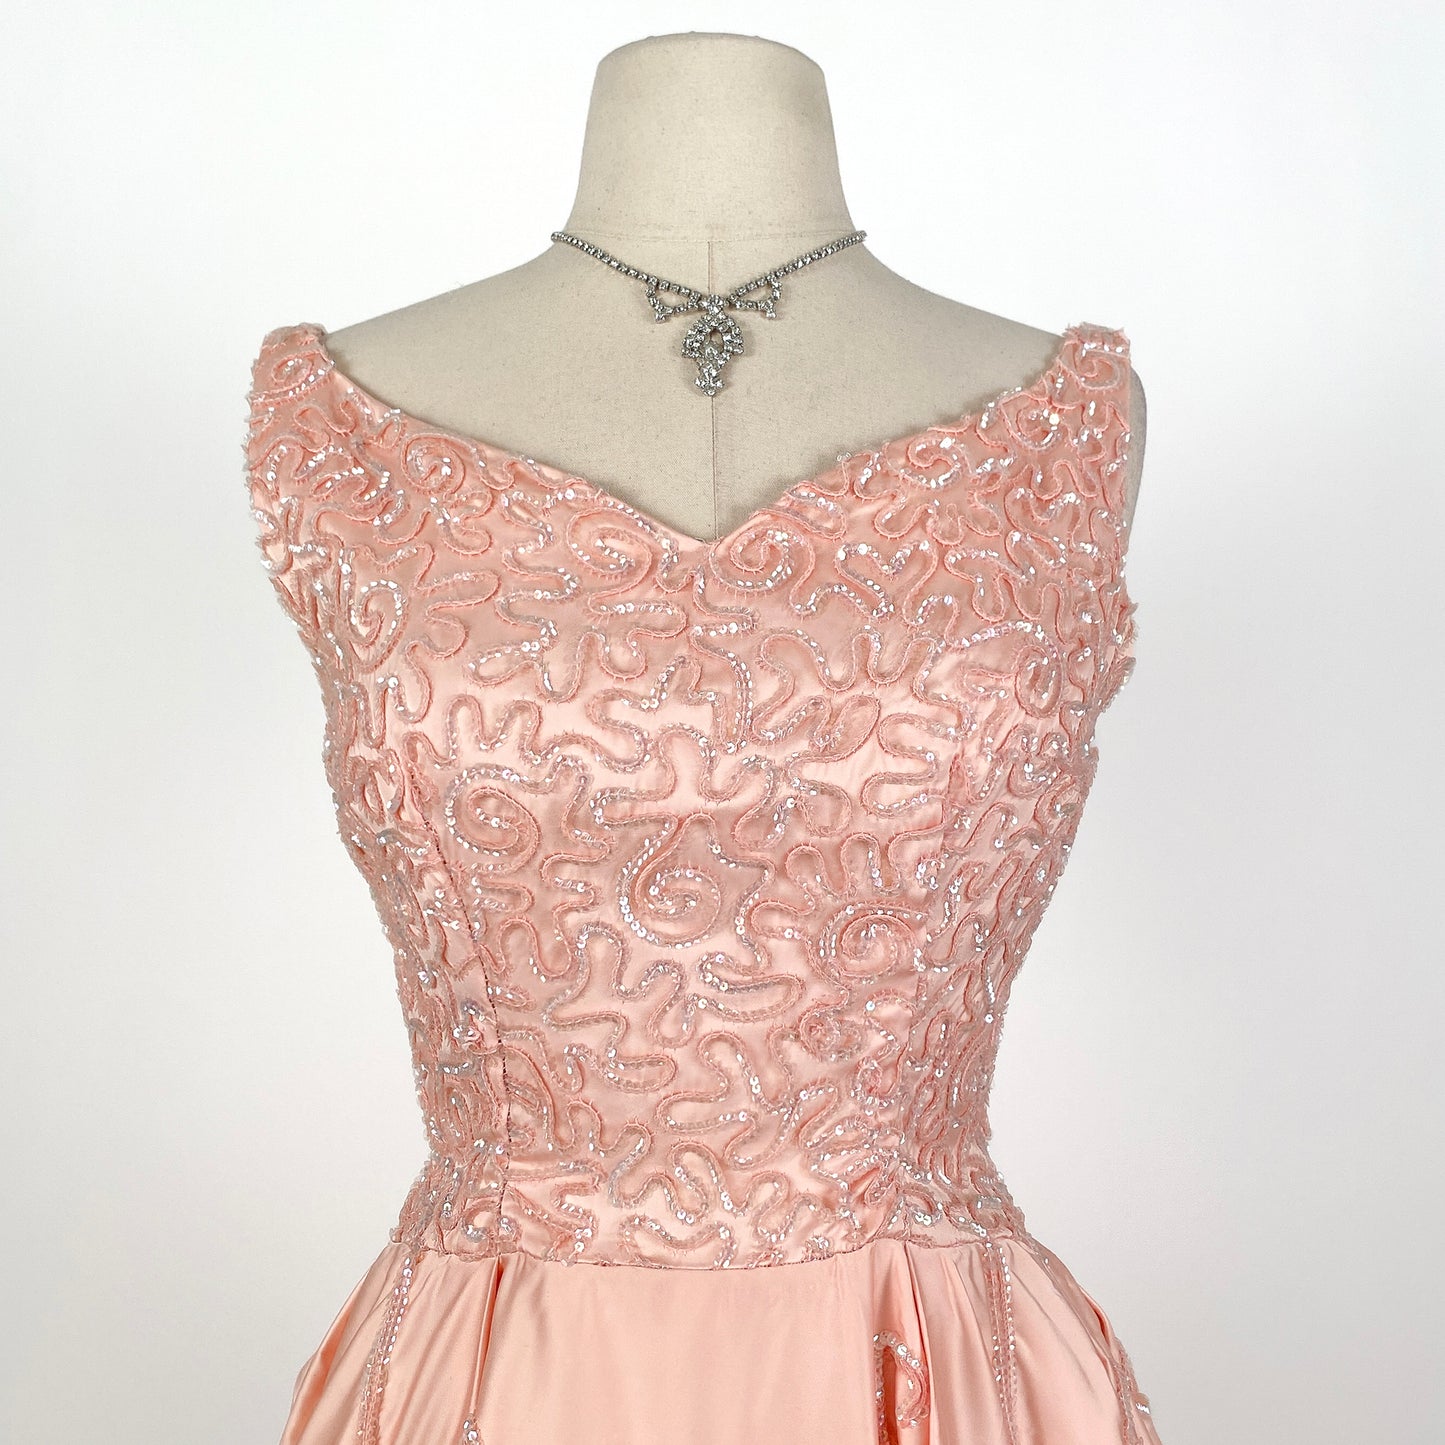 1960s Pink Satin Gown with Iridescent Sequins by Emma Domb / Waist 24